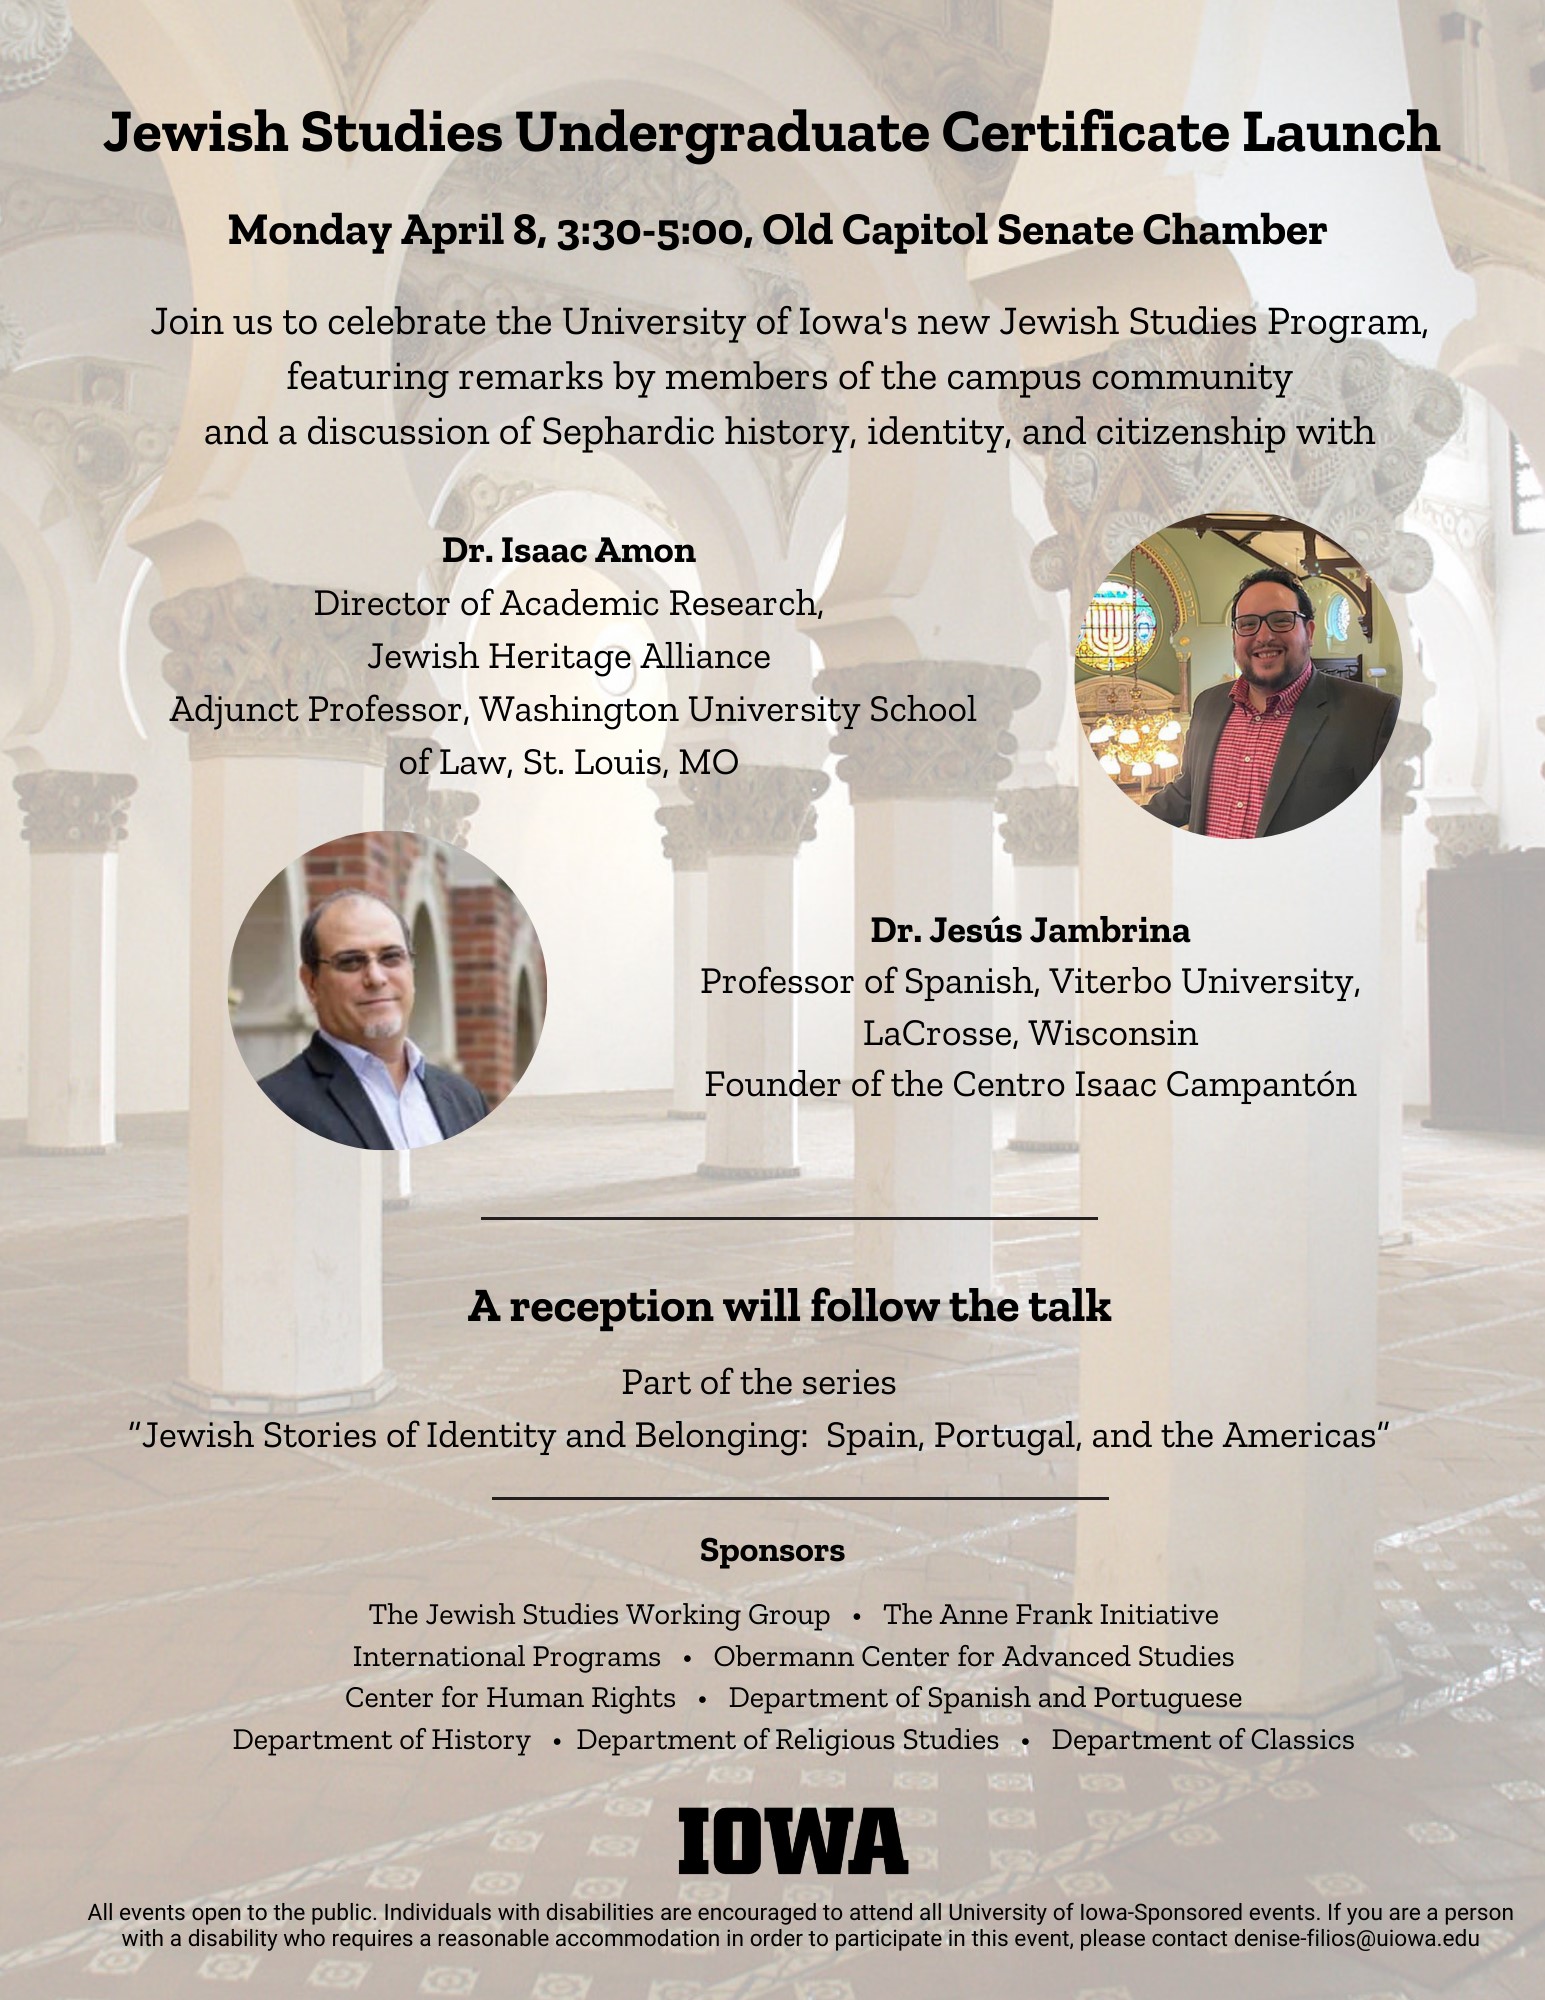 Monday april 8th at old capitol senate chambers launch of jewish studies certificate